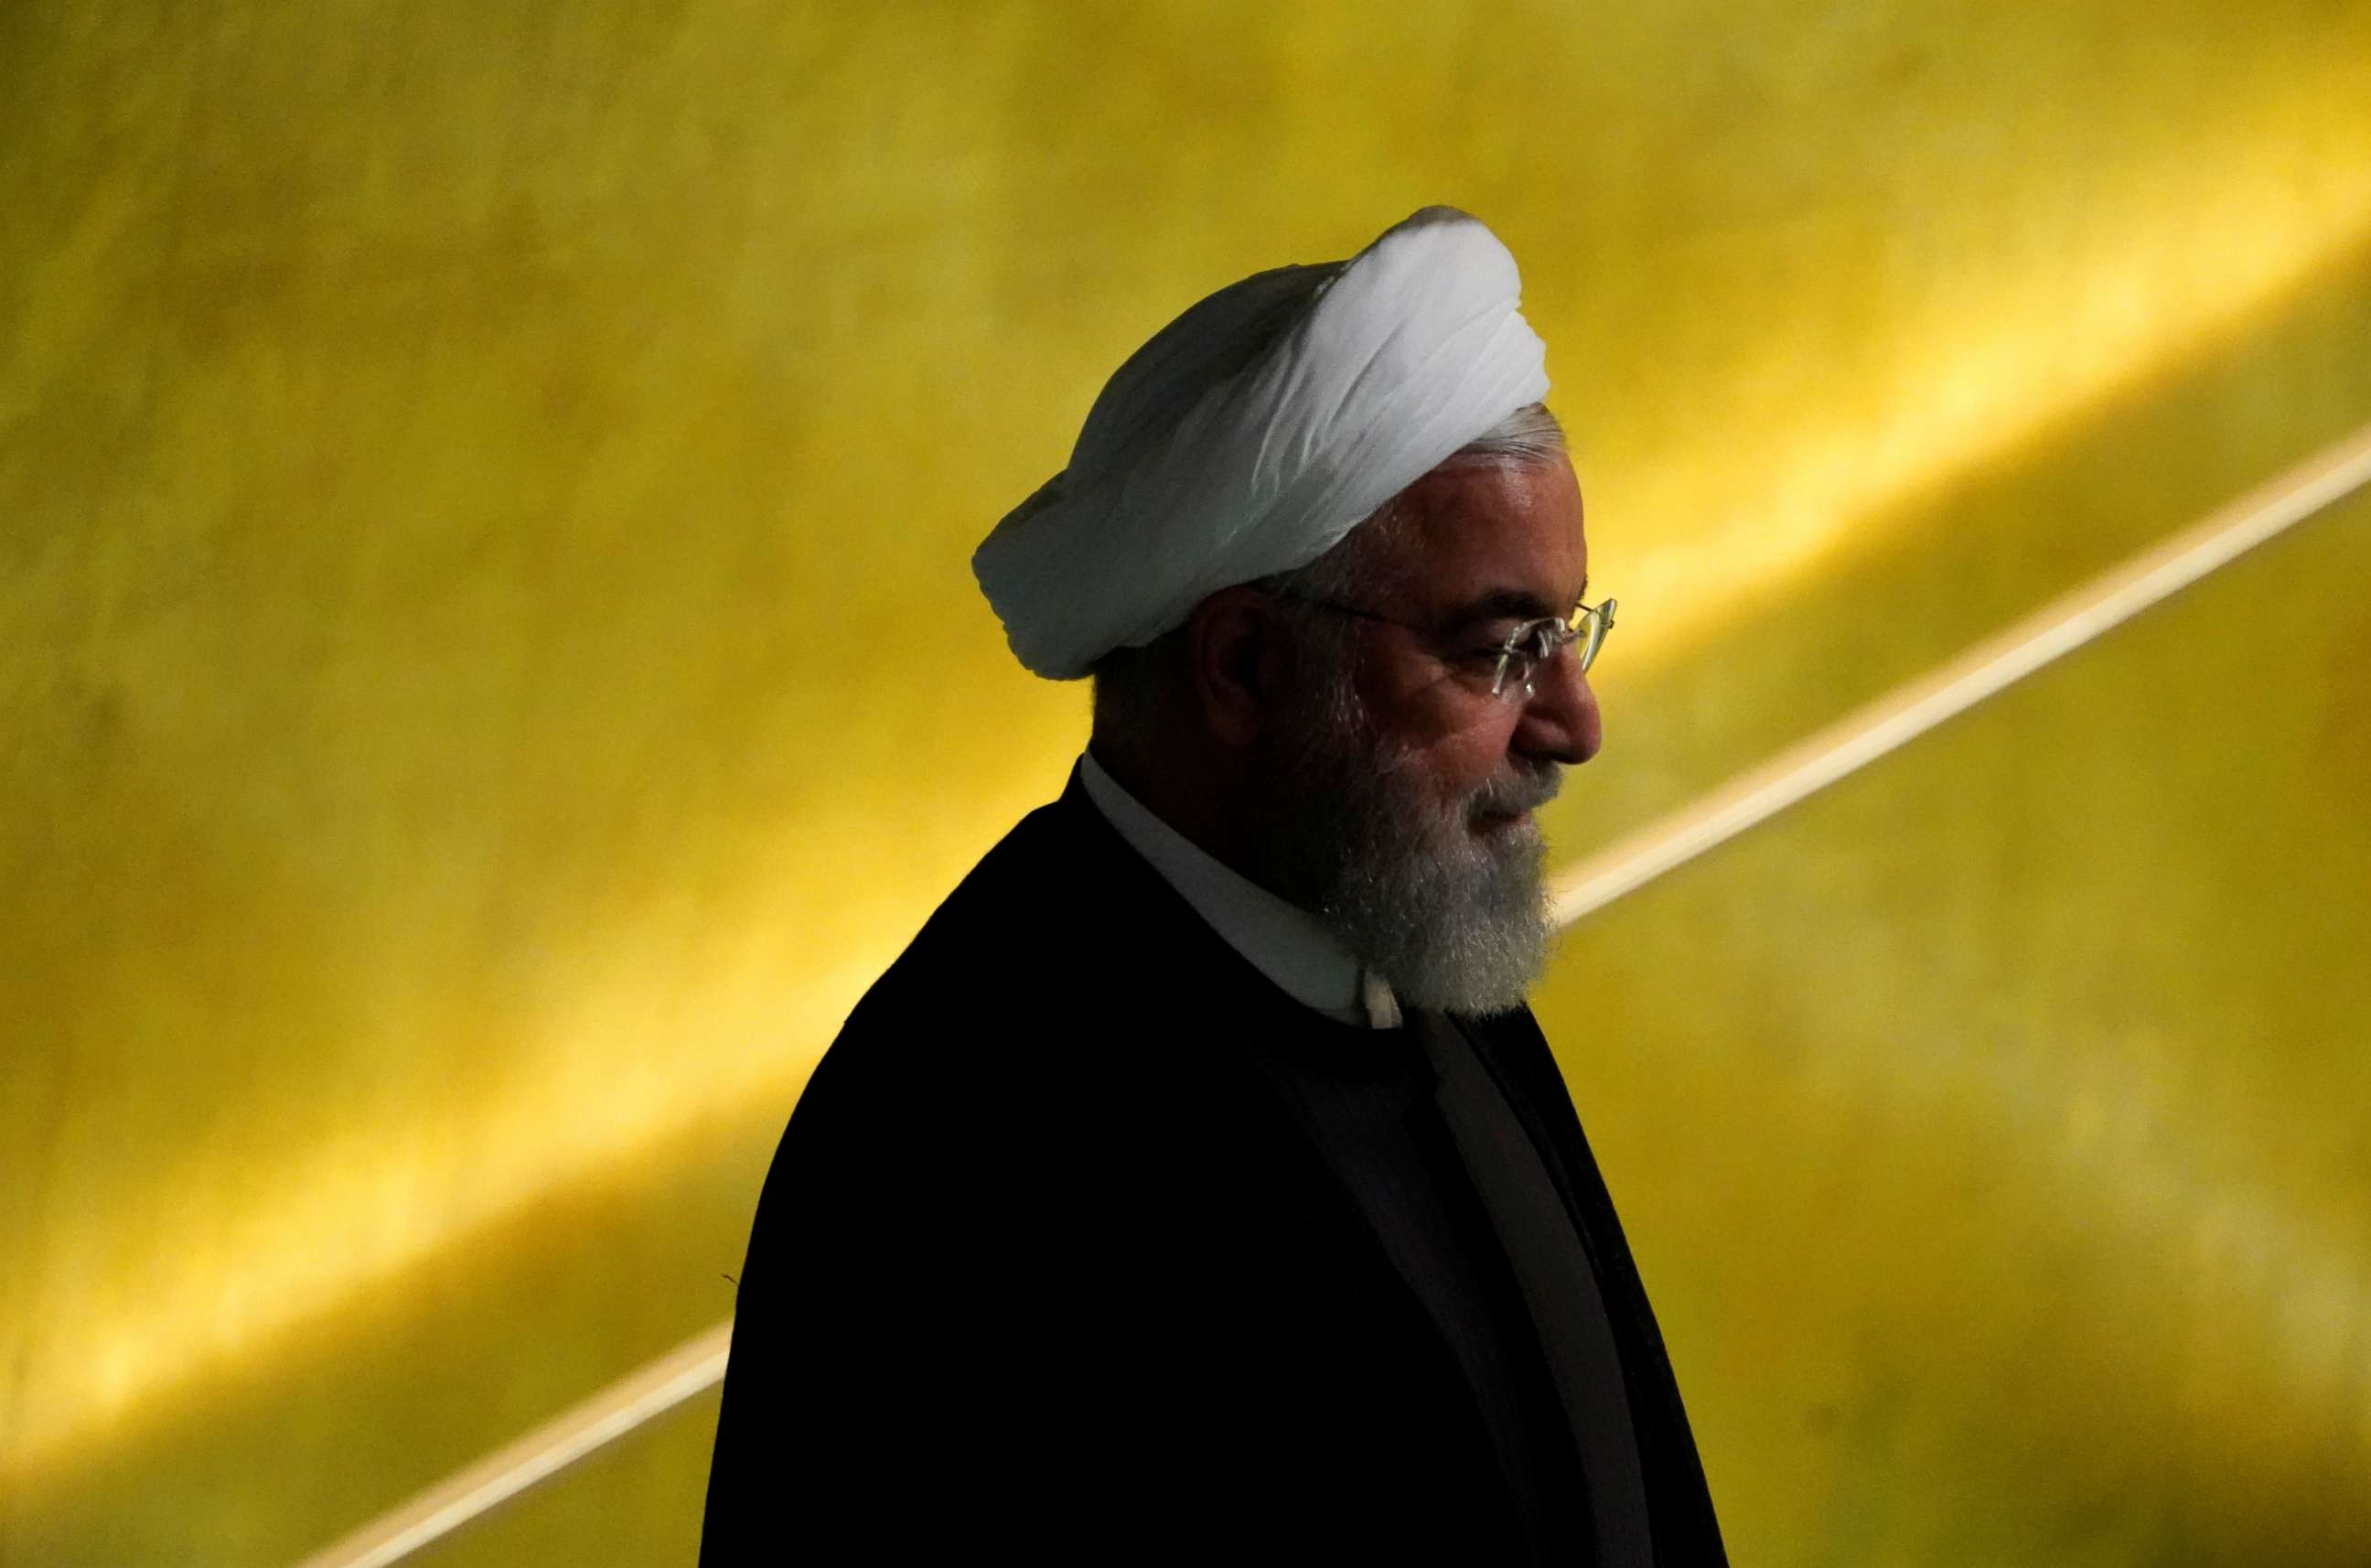 PHOTO: Iran's President Hassan Rouhani arrives to address the 74th session of the United Nations General Assembly at U.N. headquarters in New York City, on Sept. 25, 2019.